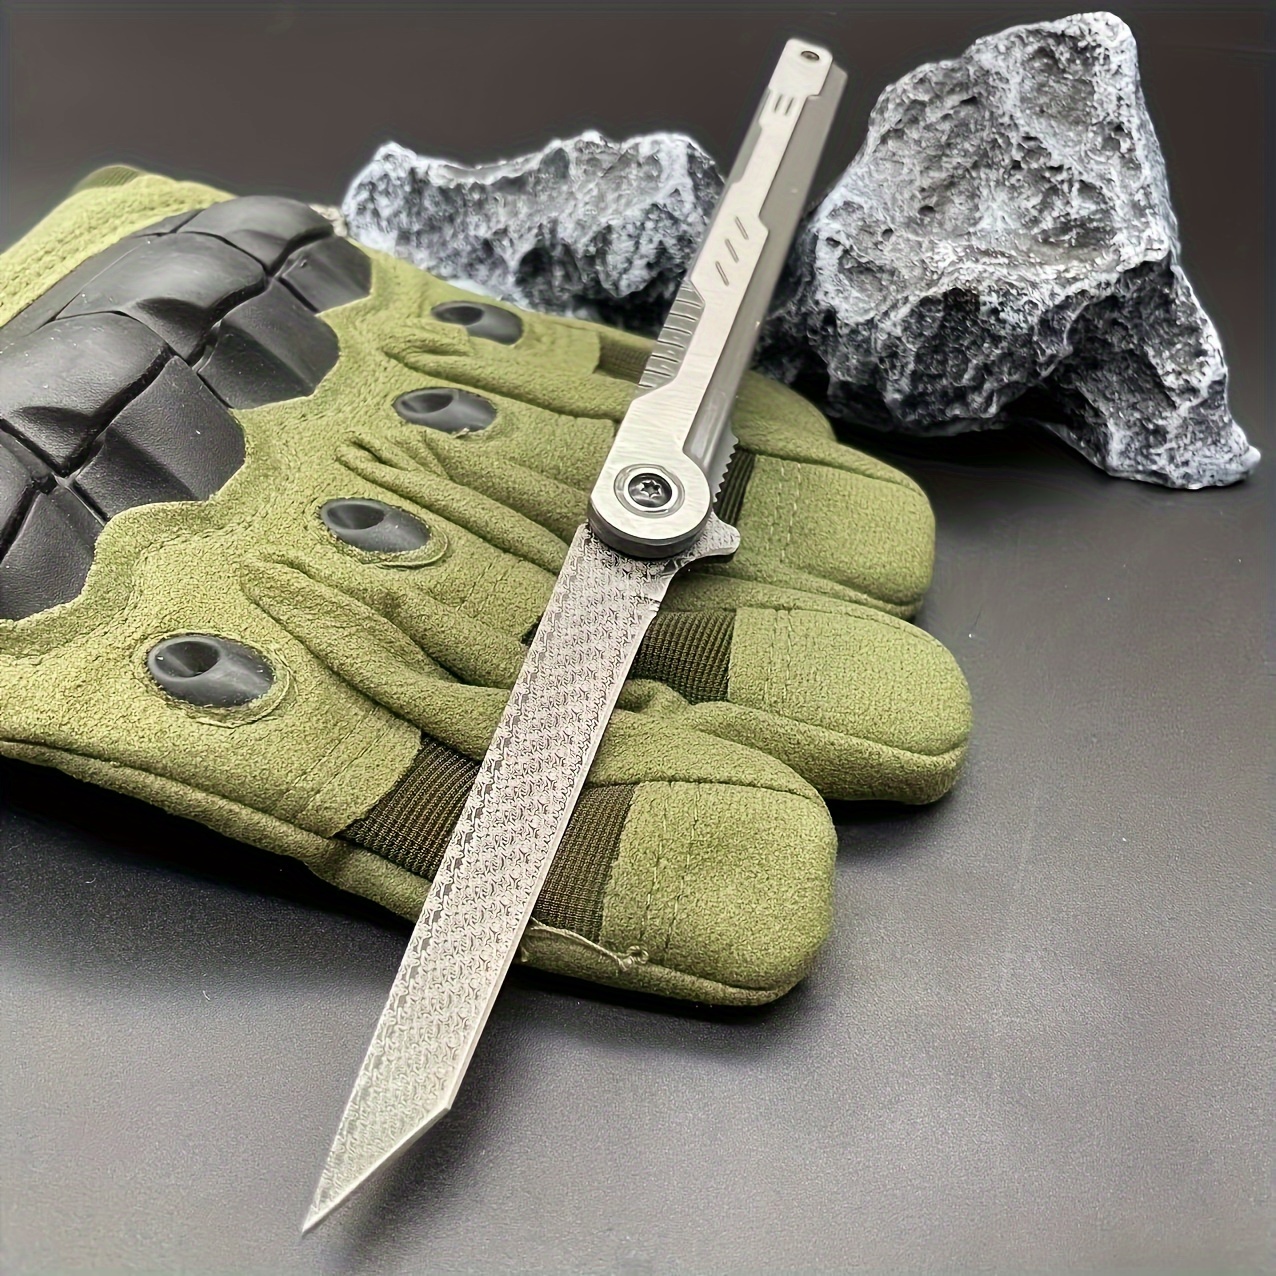 

Edc Pocket Knife - 7cr13mov Steel Tanto Blade, Slim Survival Knife With Clip And Liner Lock, Window Breaker - For Outdoor Camping